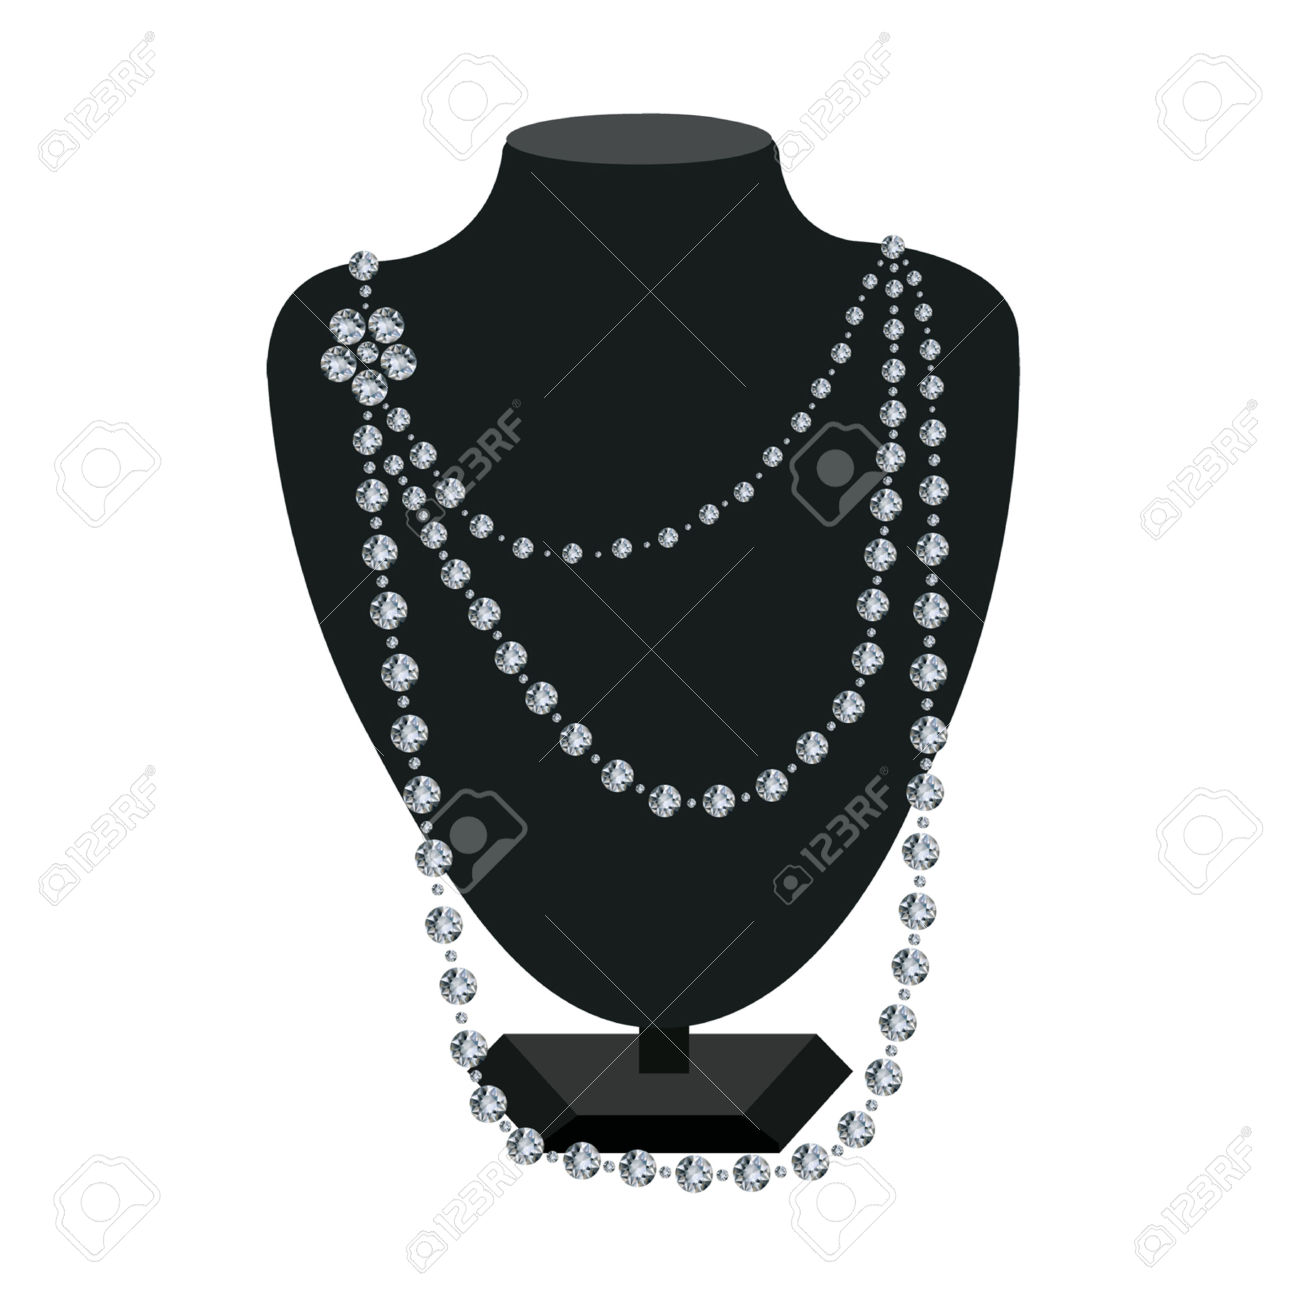 Jewelry mannequin free clipart